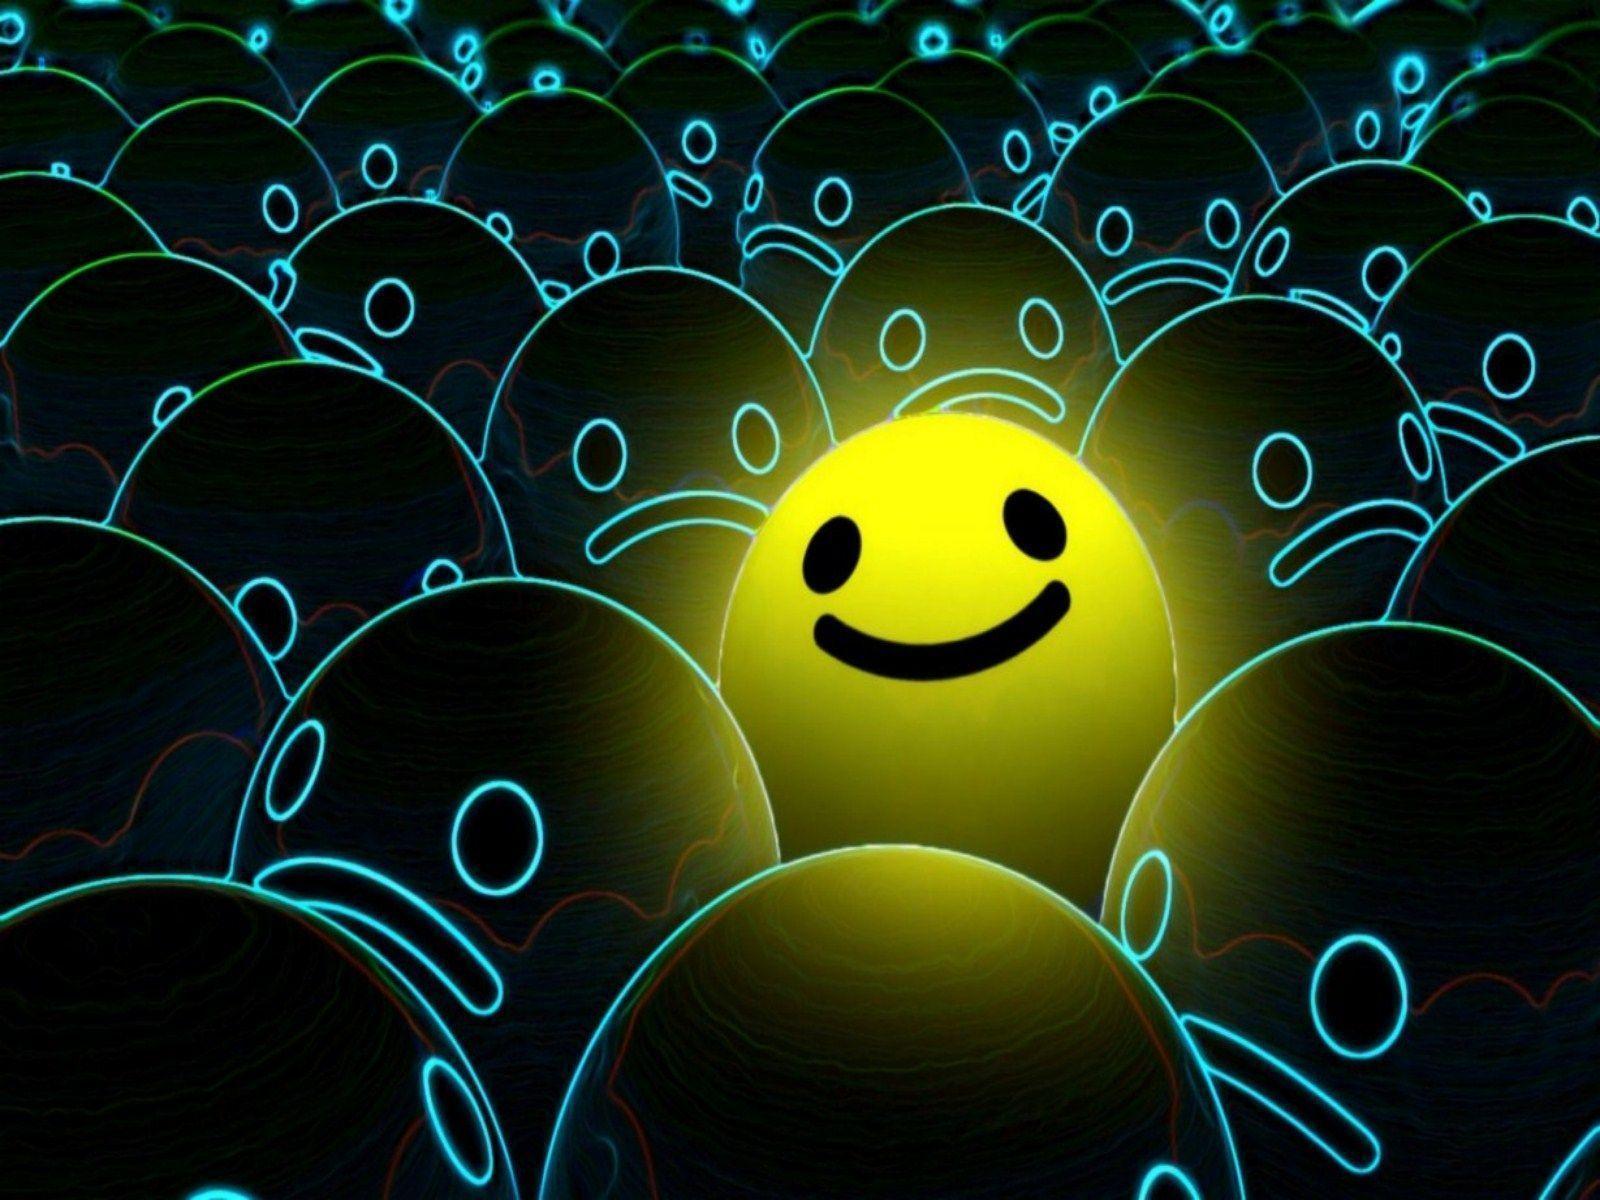 Wallpaper For > Colorful Smiley Face Wallpaper